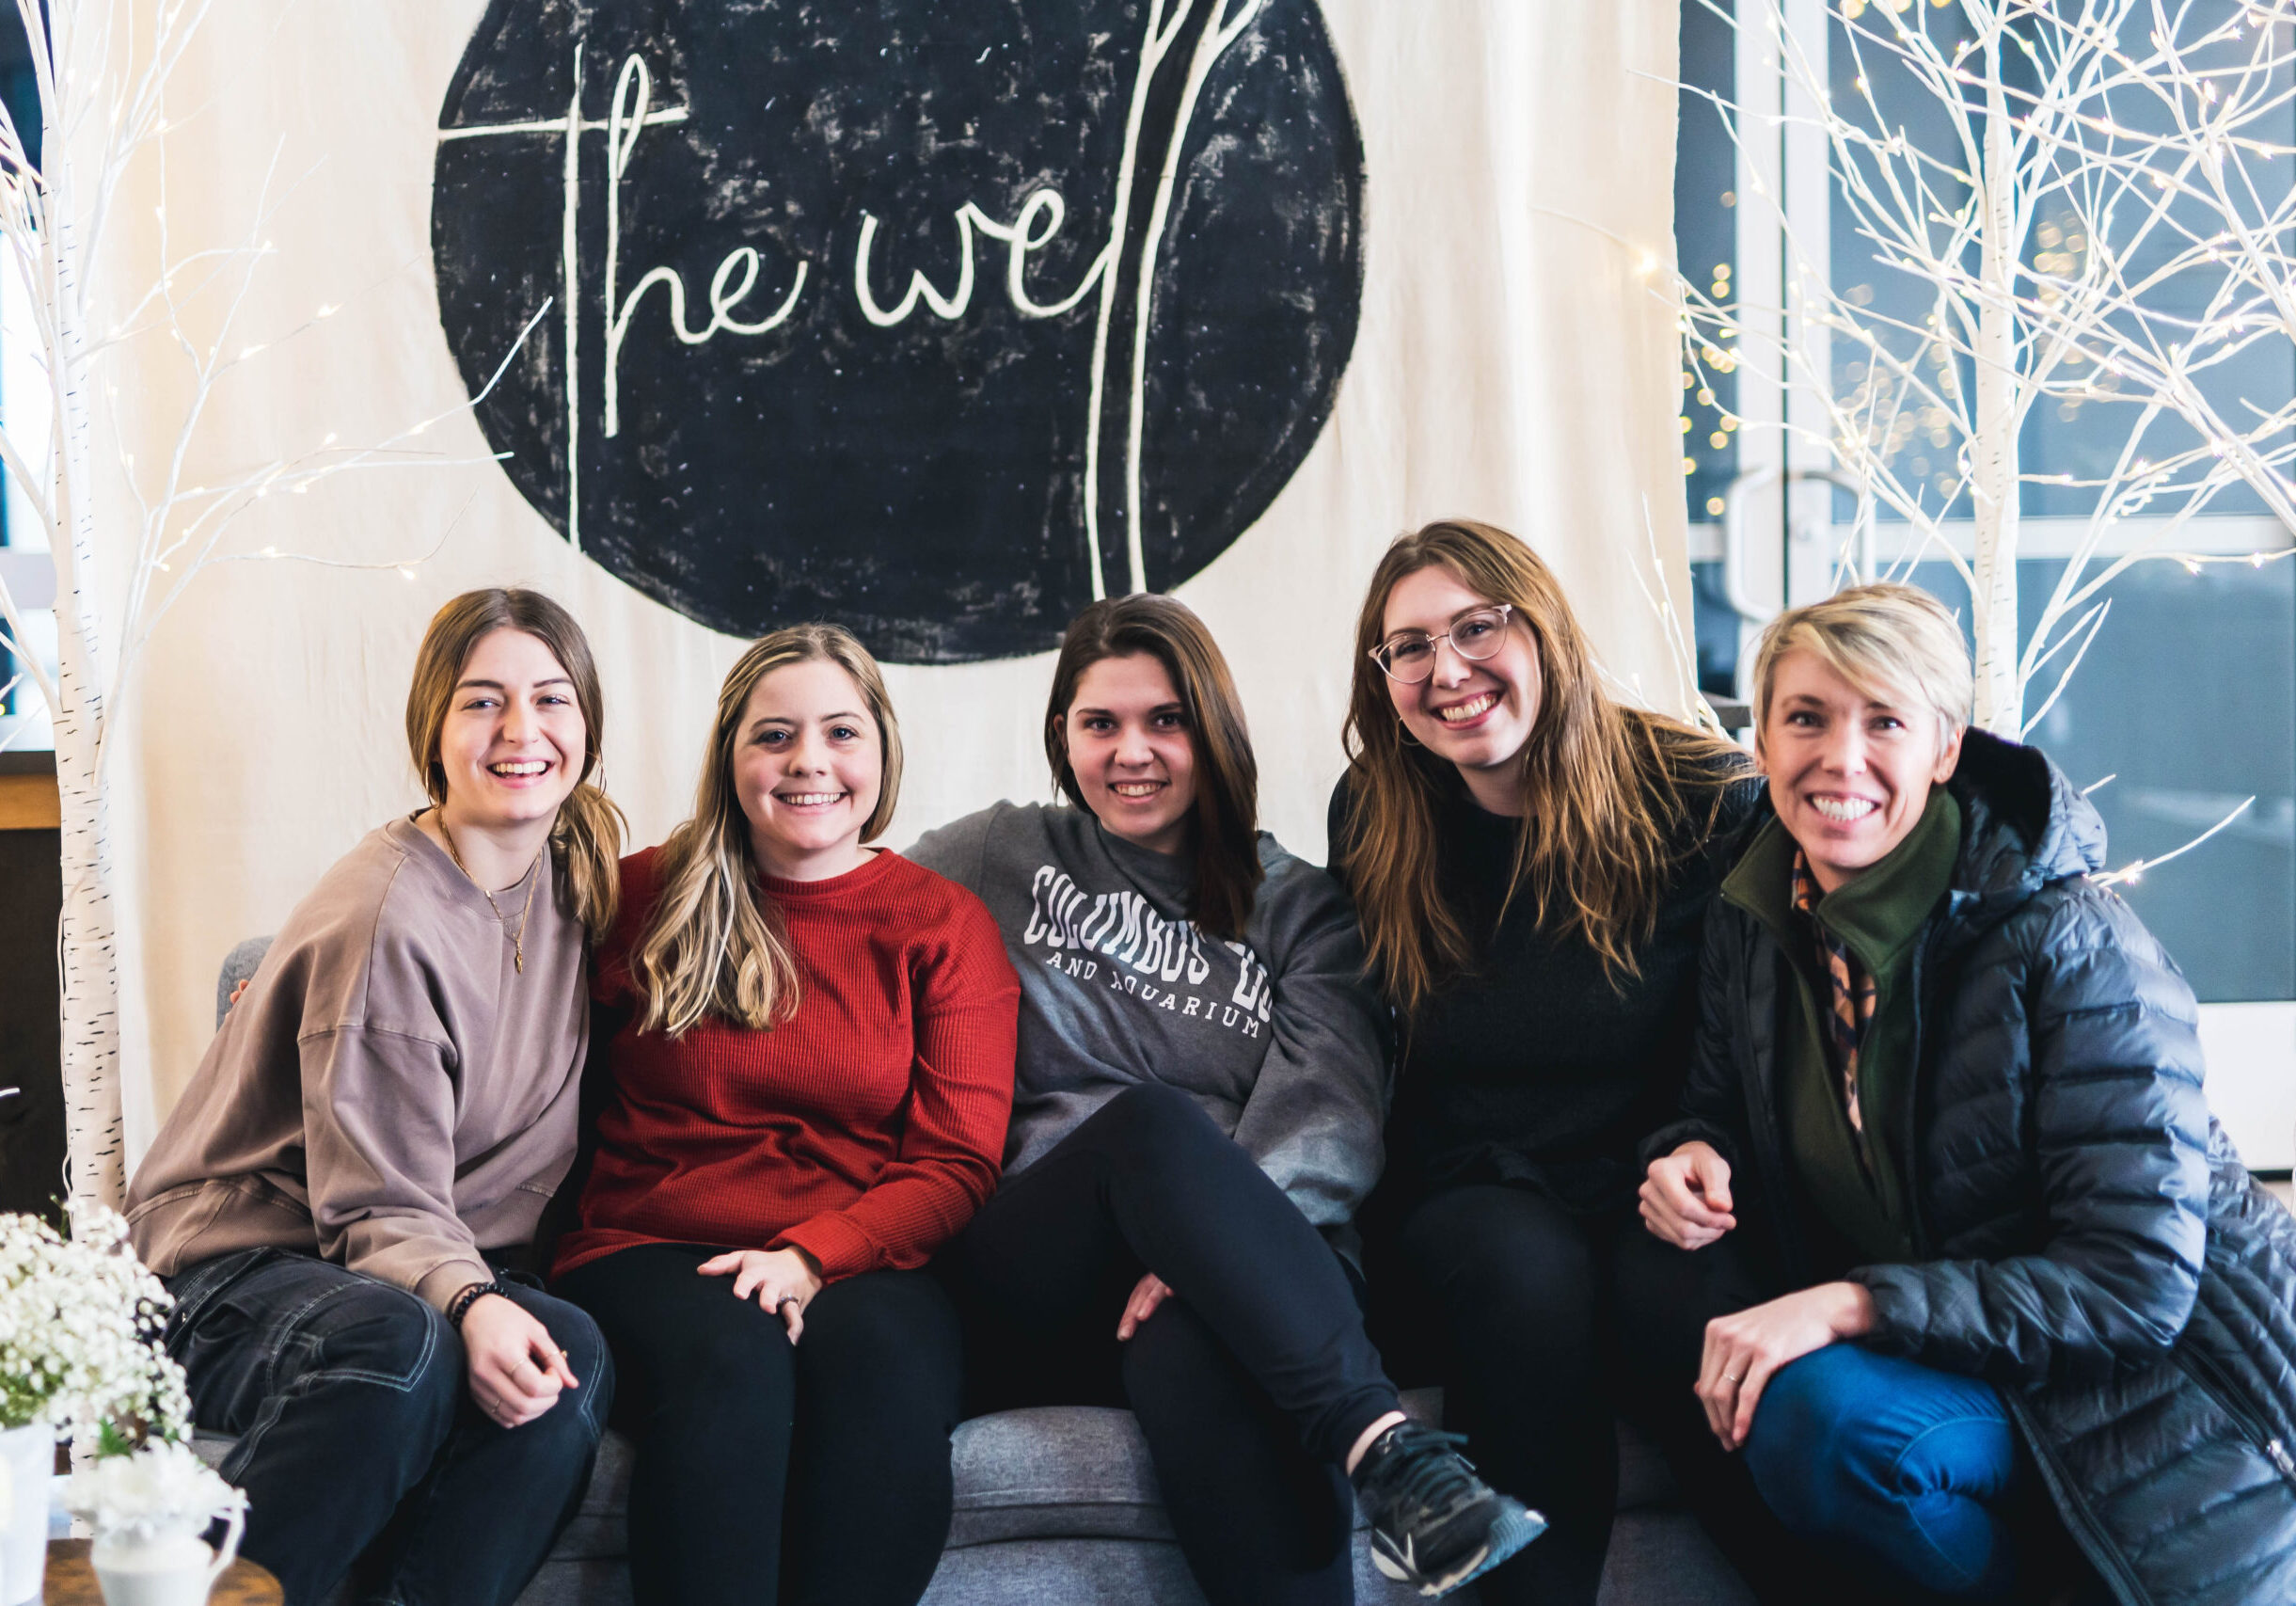 The Well a ministry for women at North Way Christian Community